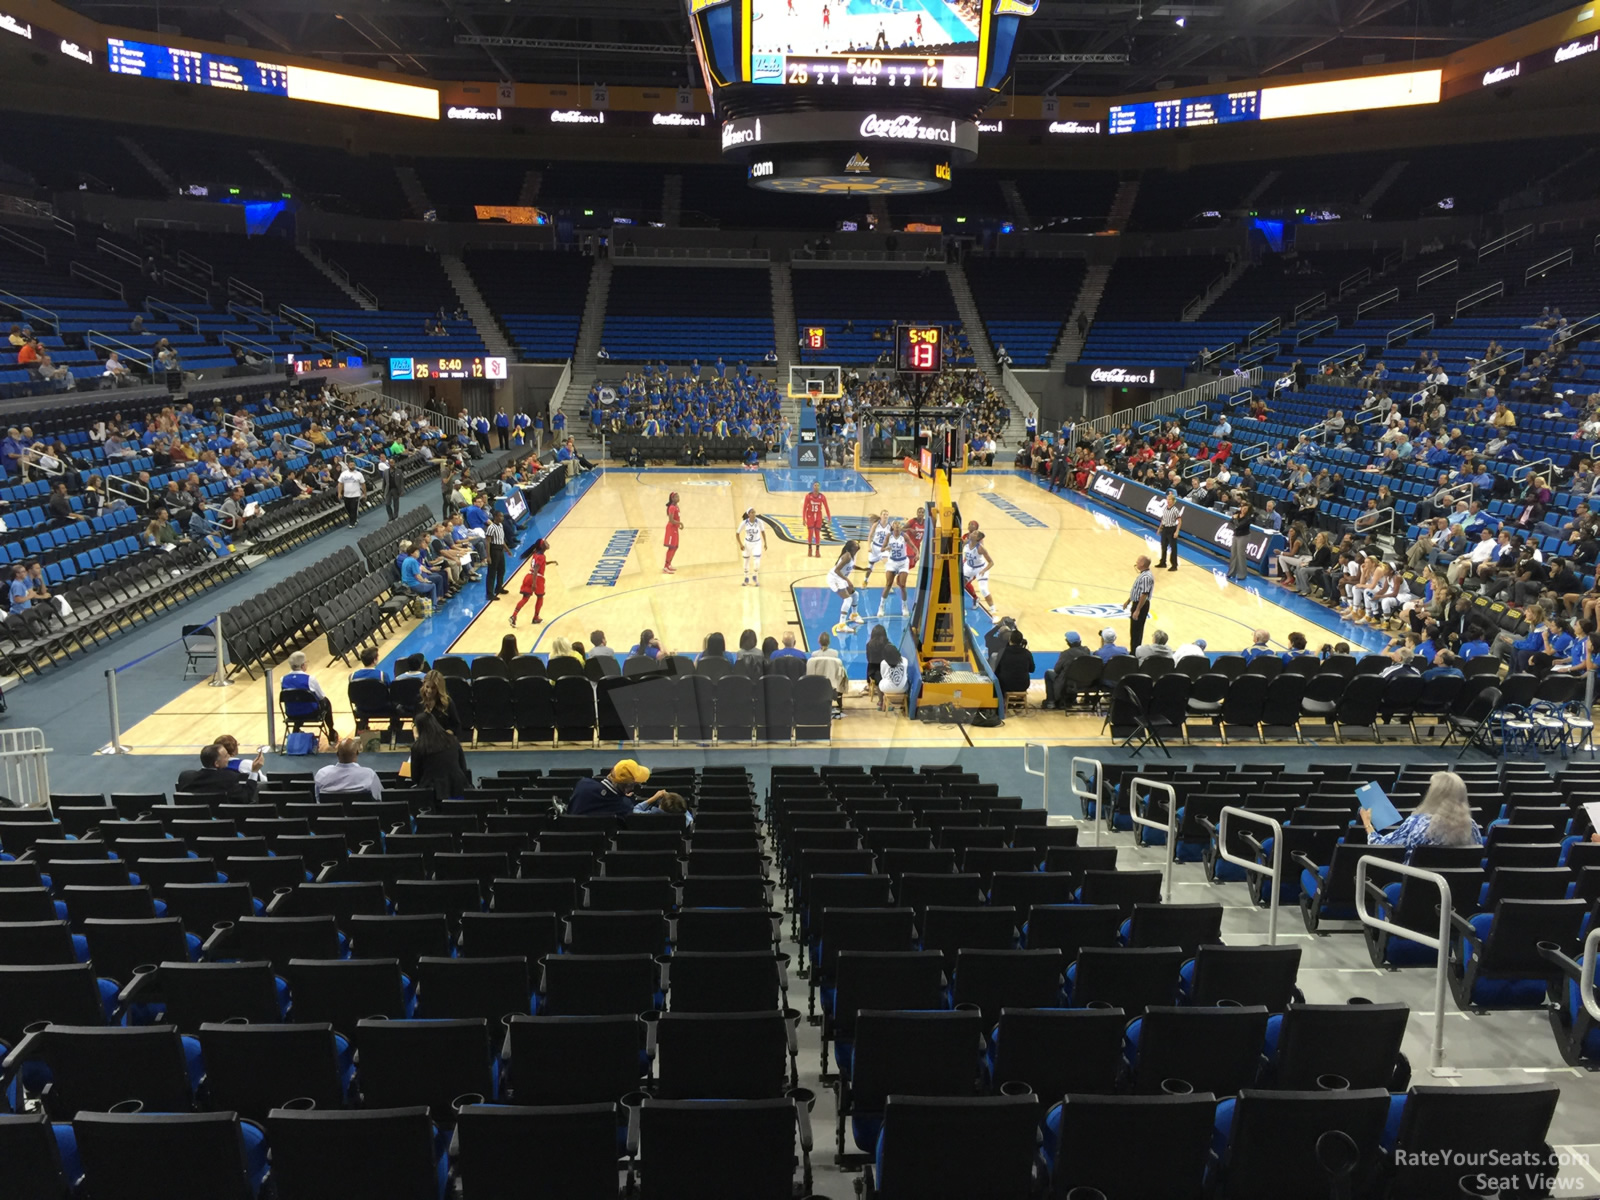 Section 109 at Pauley Pavilion - RateYourSeats.com